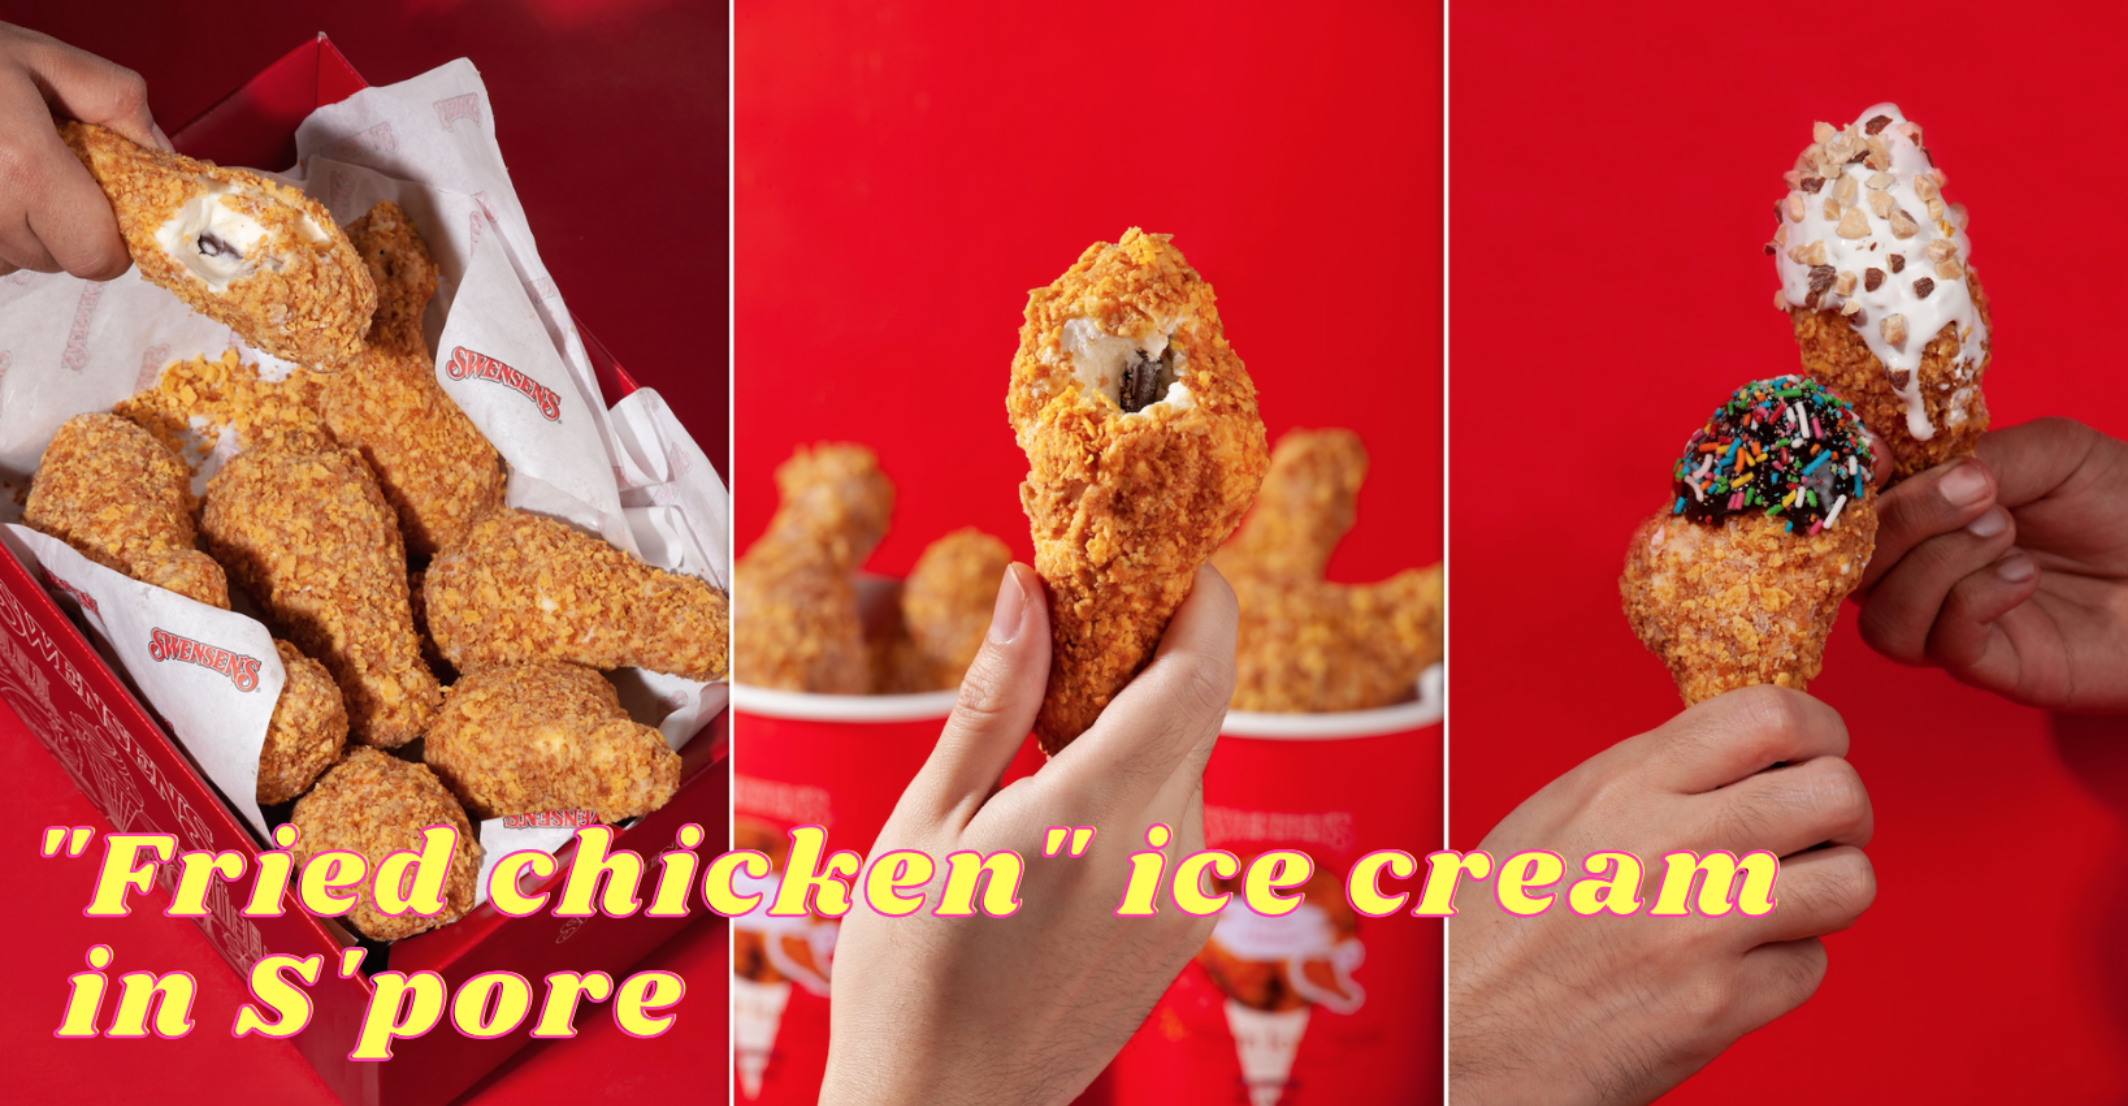 Swensen's confuses S'poreans with 'fried chicken' ice cream, S